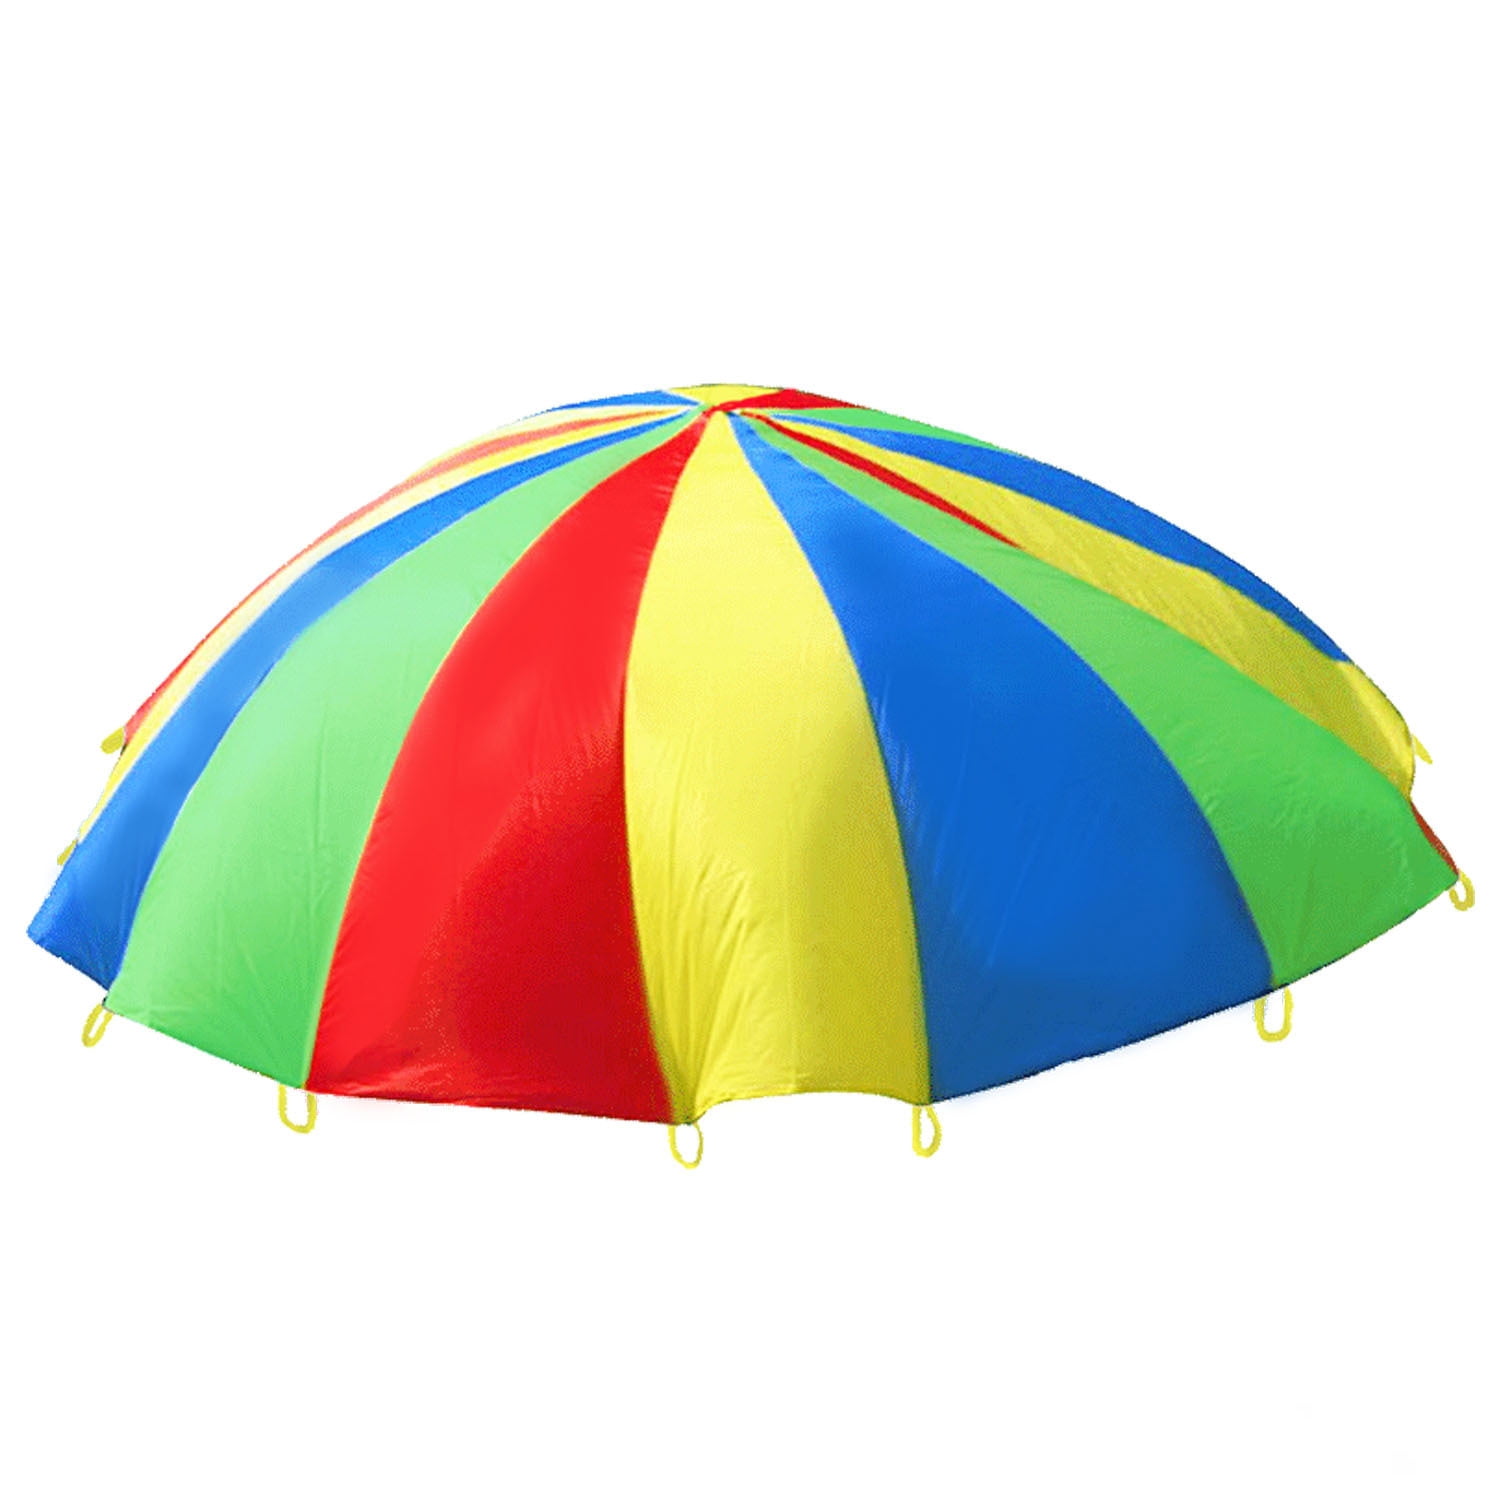 6ft 8ft 10ft 12ft 16ft 20ft Play Parachute for Kids Rainbow Parachute Toy Party Game Parachute with Handles for Kids Children Gymnastics Cooperative Play Outdoor Games Playground Activities 